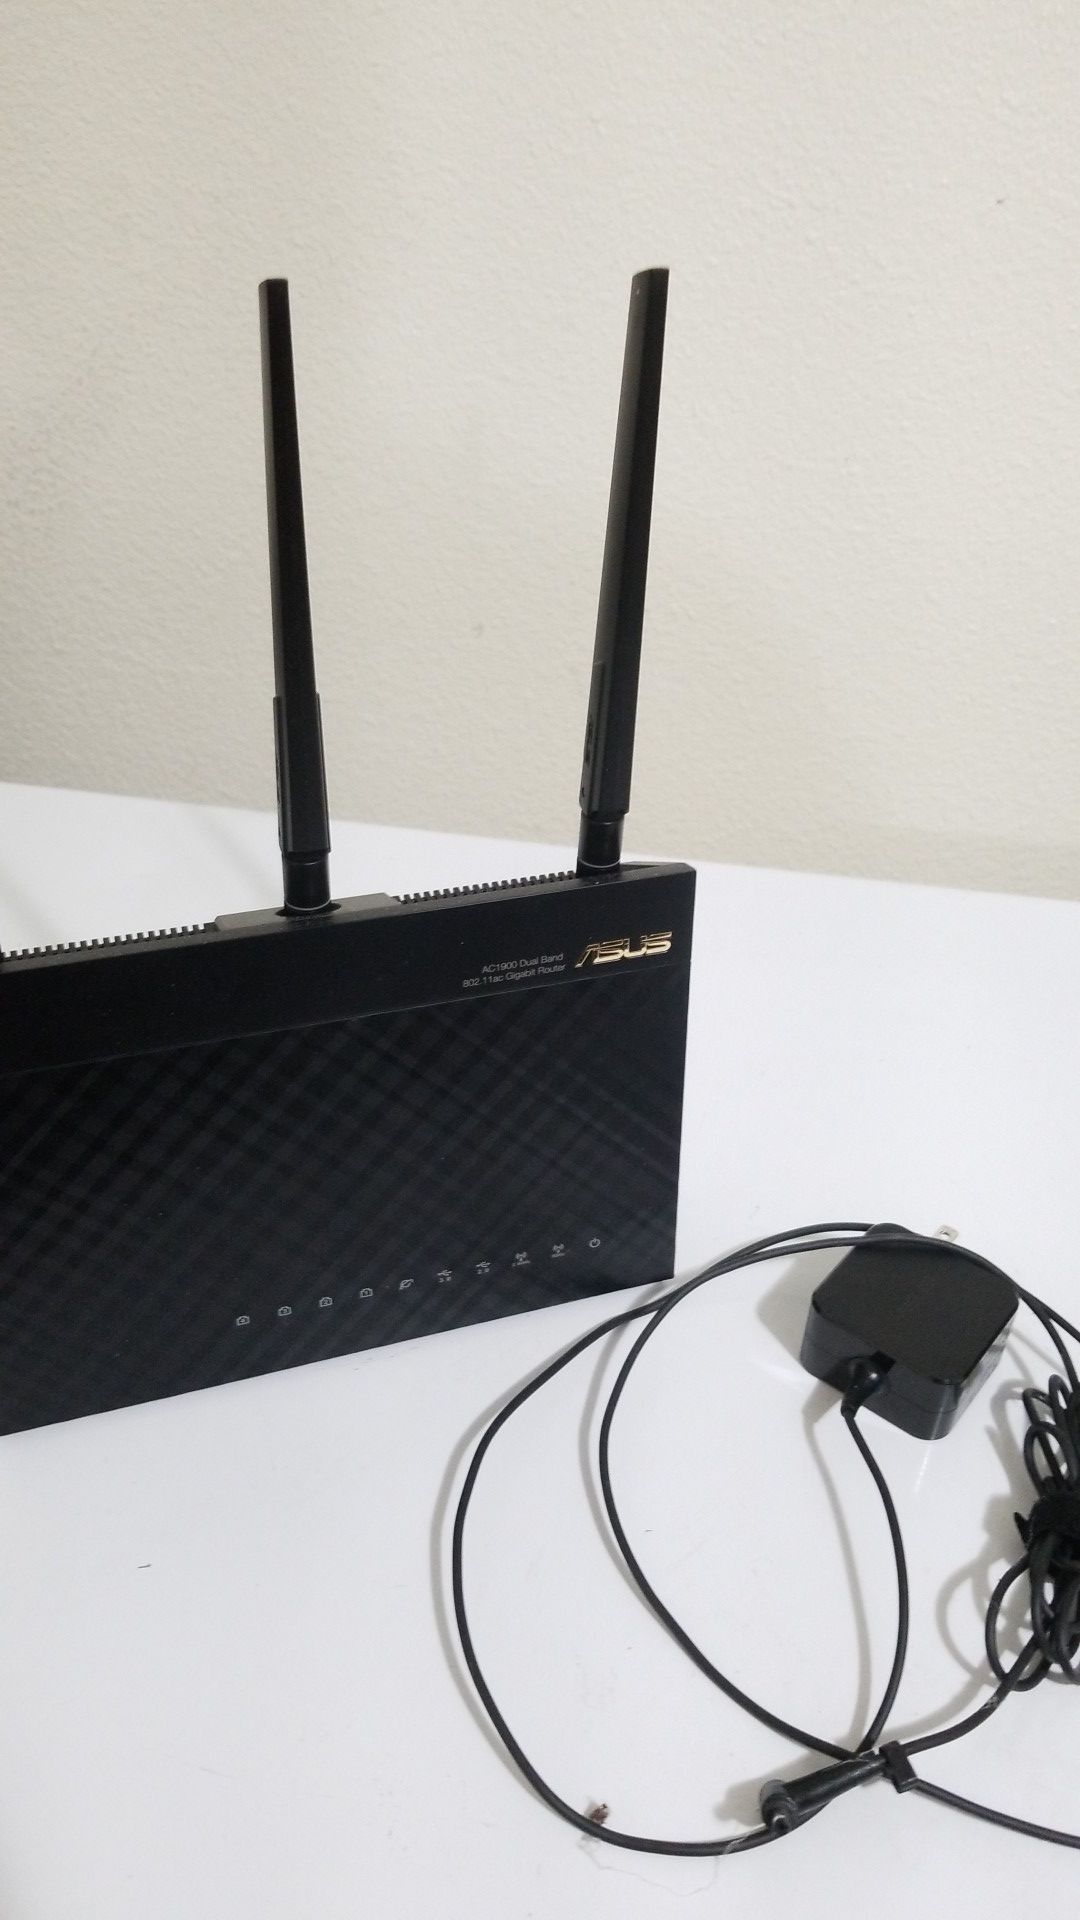 Asus RT-AC1900P Wireless Router